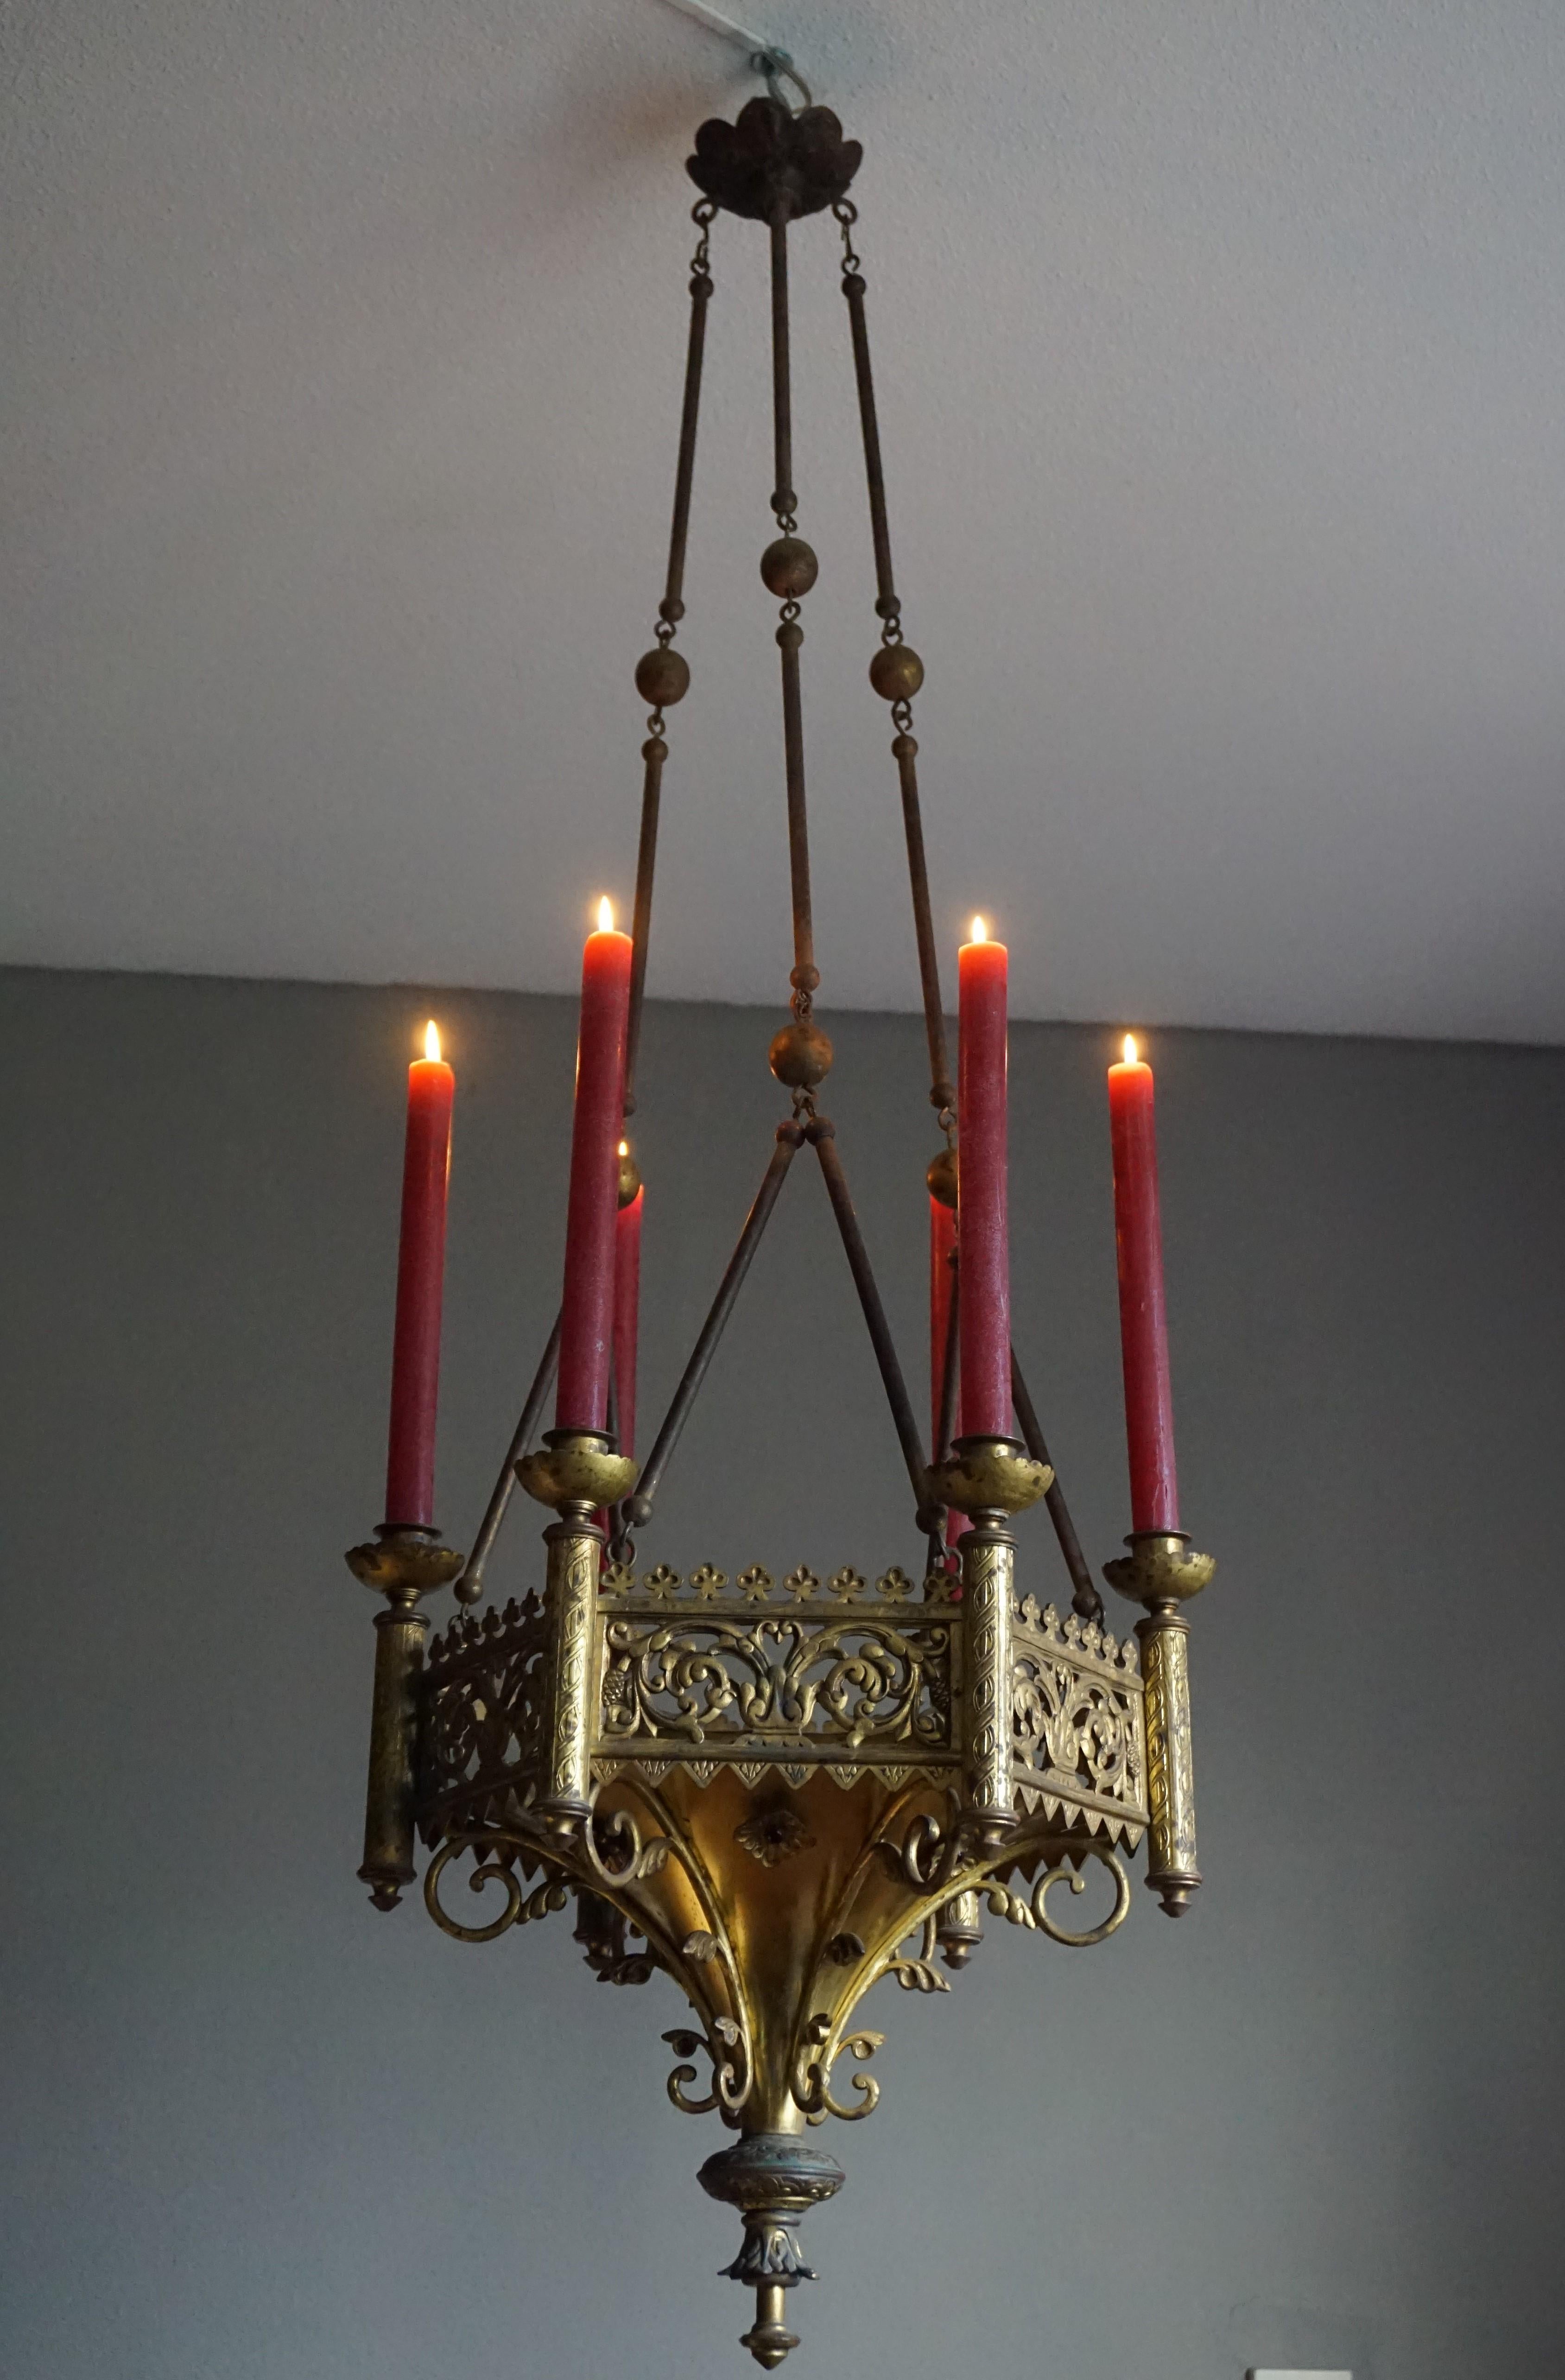 Good size and all handcrafted antique bronze chandelier with brass chains.

Finding good quality and great looking Gothic antiques in their original condition always lifts our spirits. This Gothic candle chandelier too fits that bill and its good